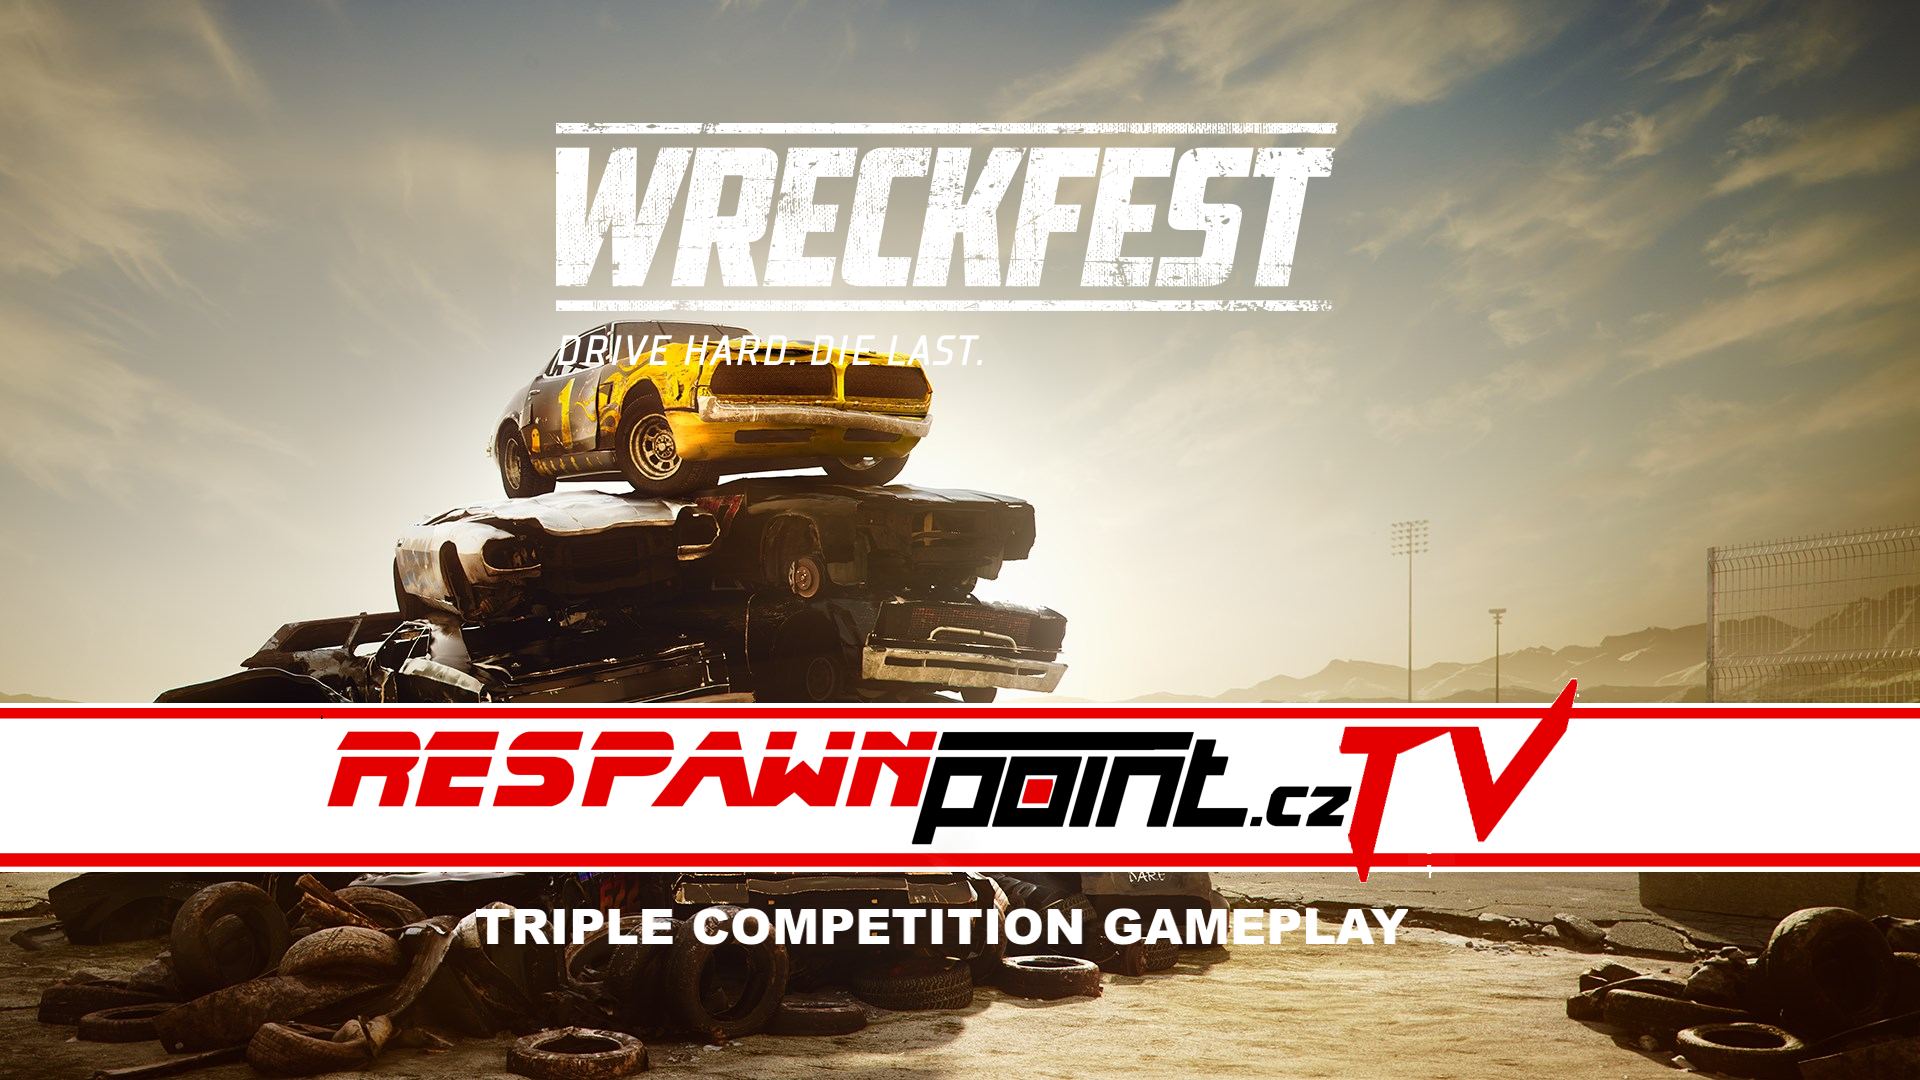 Wreckfest – Triple Competition Gameplay